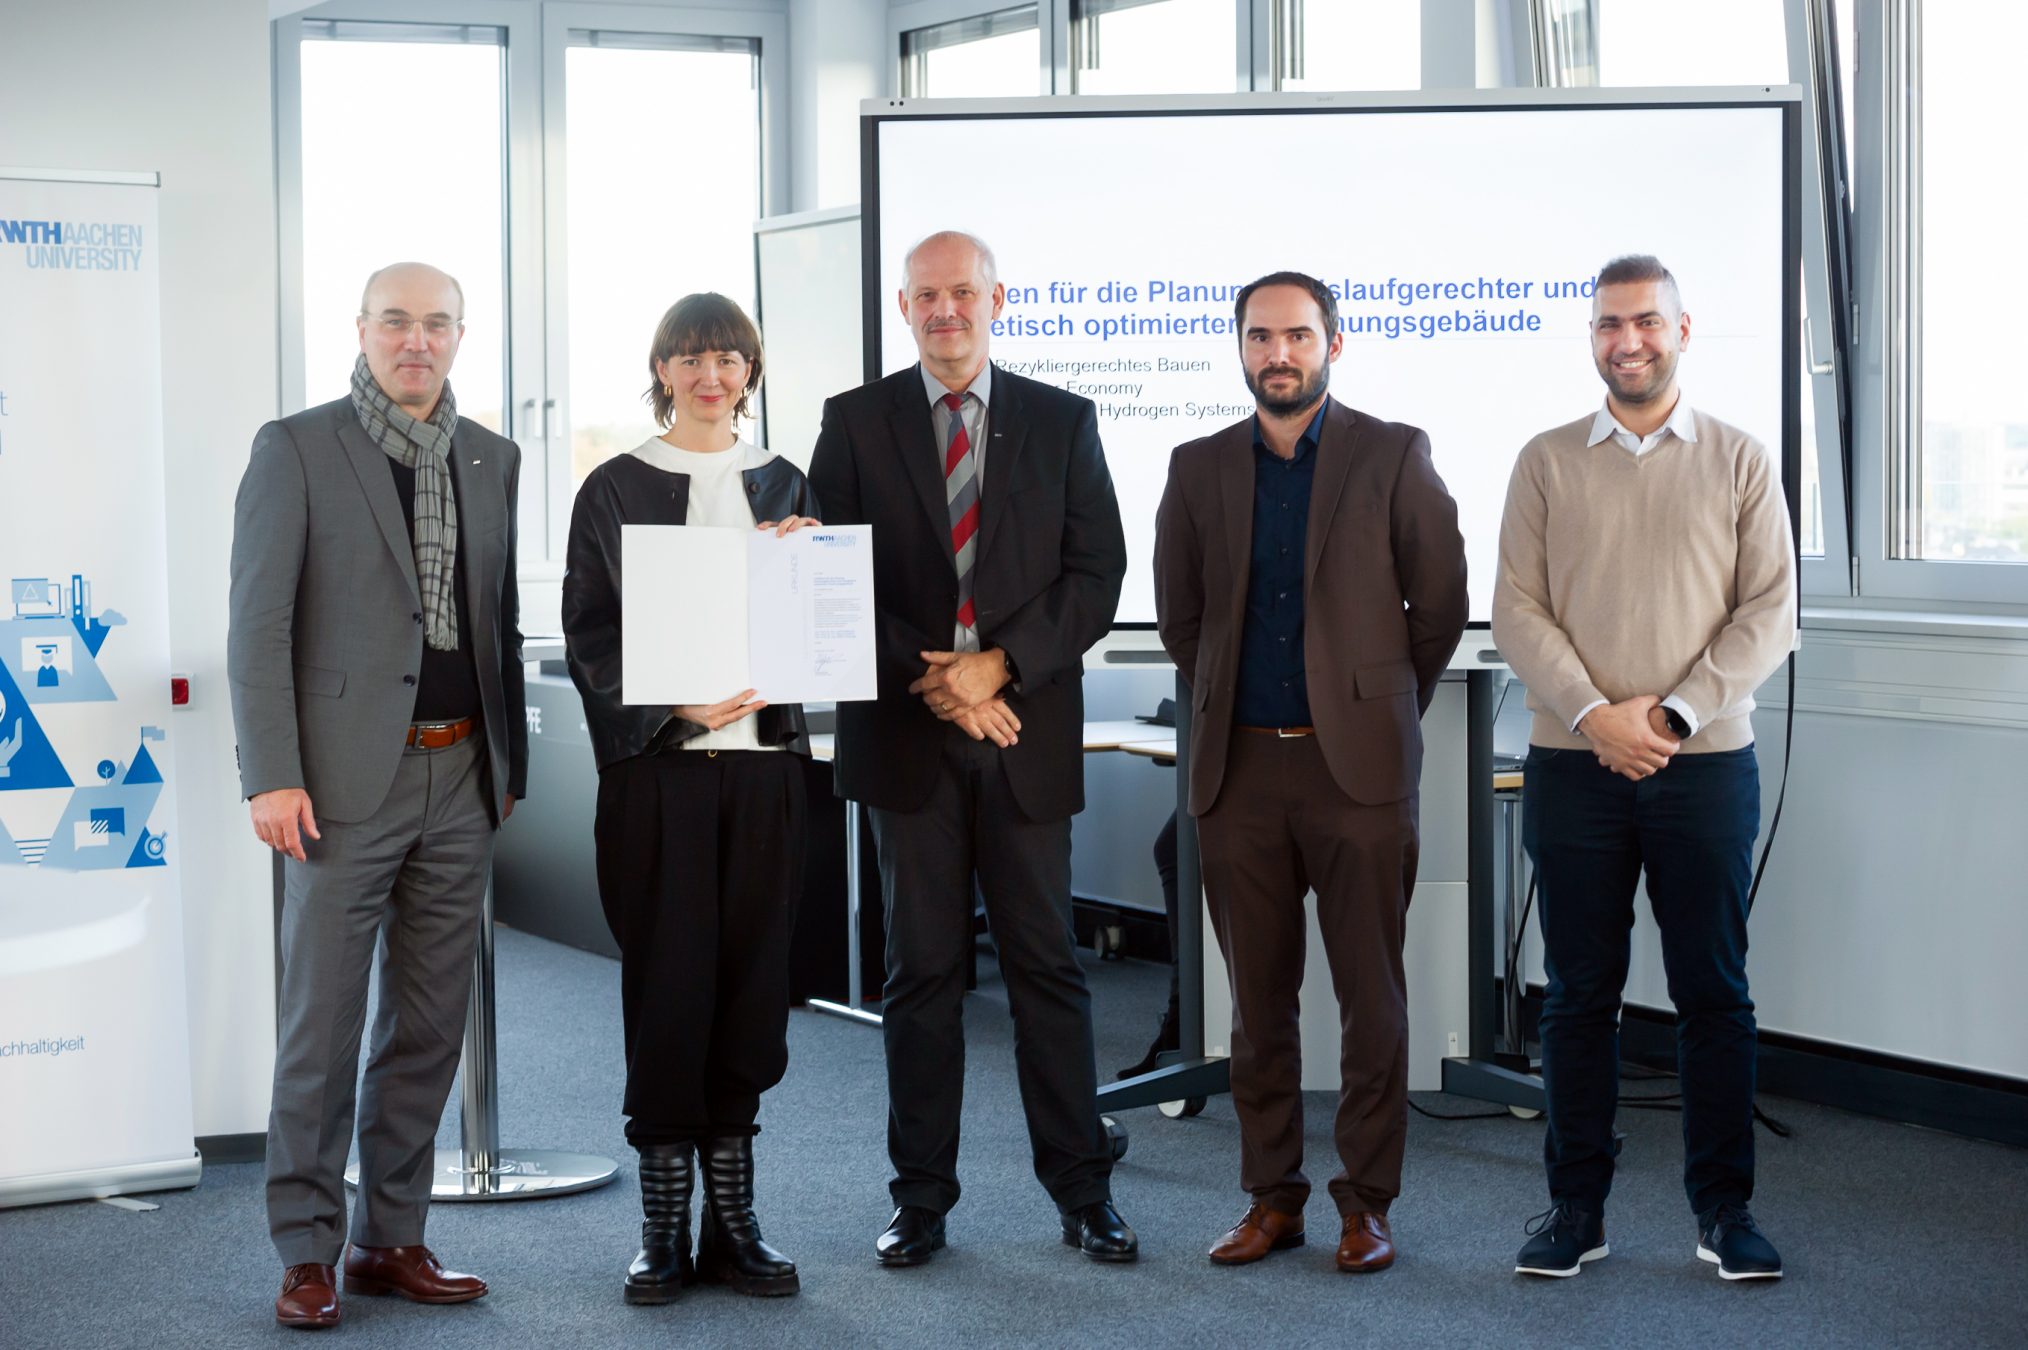 Handover Sustainability Fund “Guideline for the design of recyclable and energy-optimized research buildings” to CSHS, Aachen